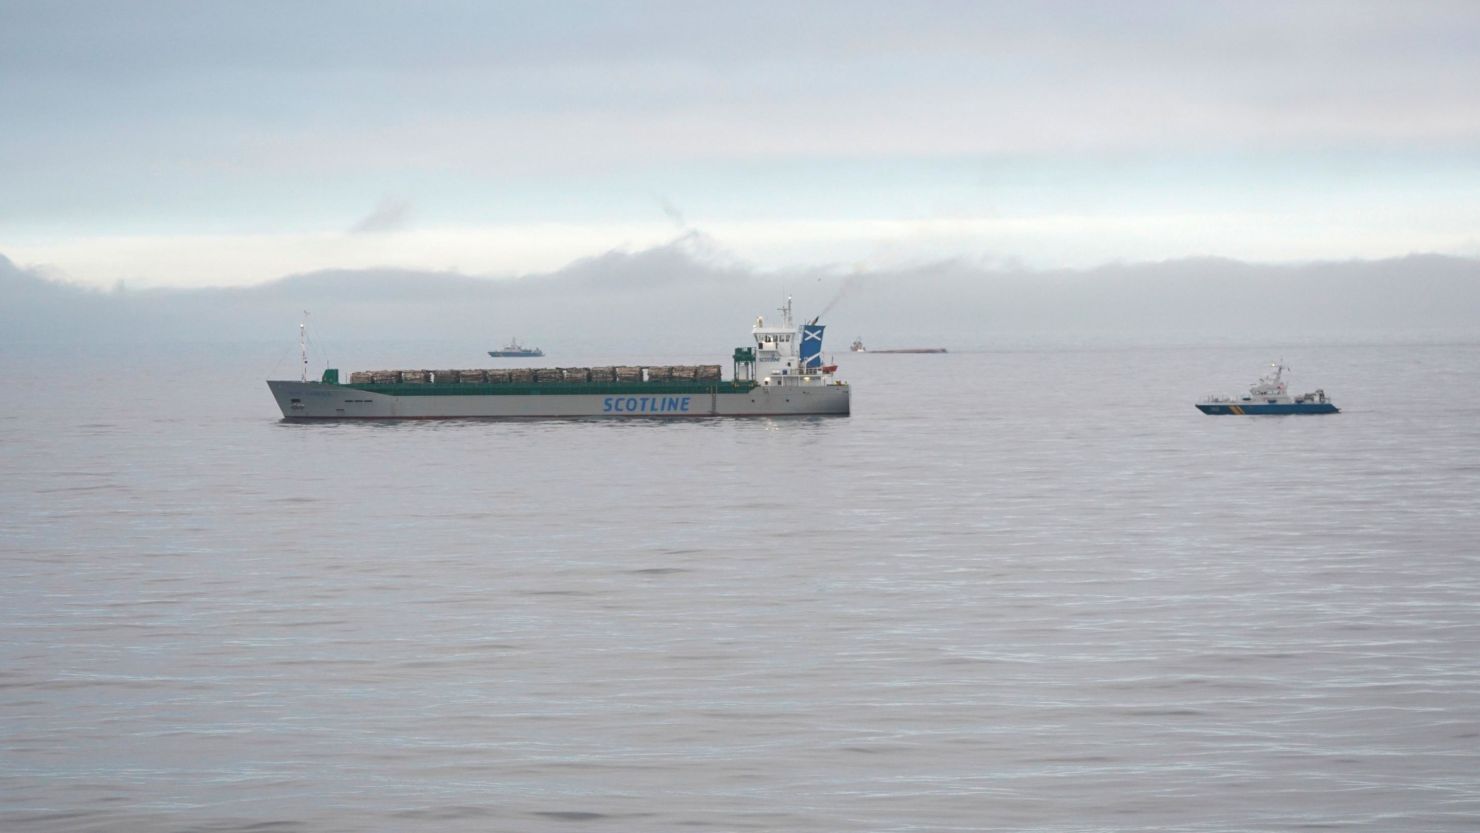 The Scot Carrier (left) and the capsized cargo ship Karin Hoej (center, background) are pictured in the Baltic Sea, between the Swedish city of Ystad and the Danish island of Bornholm, after their collision.